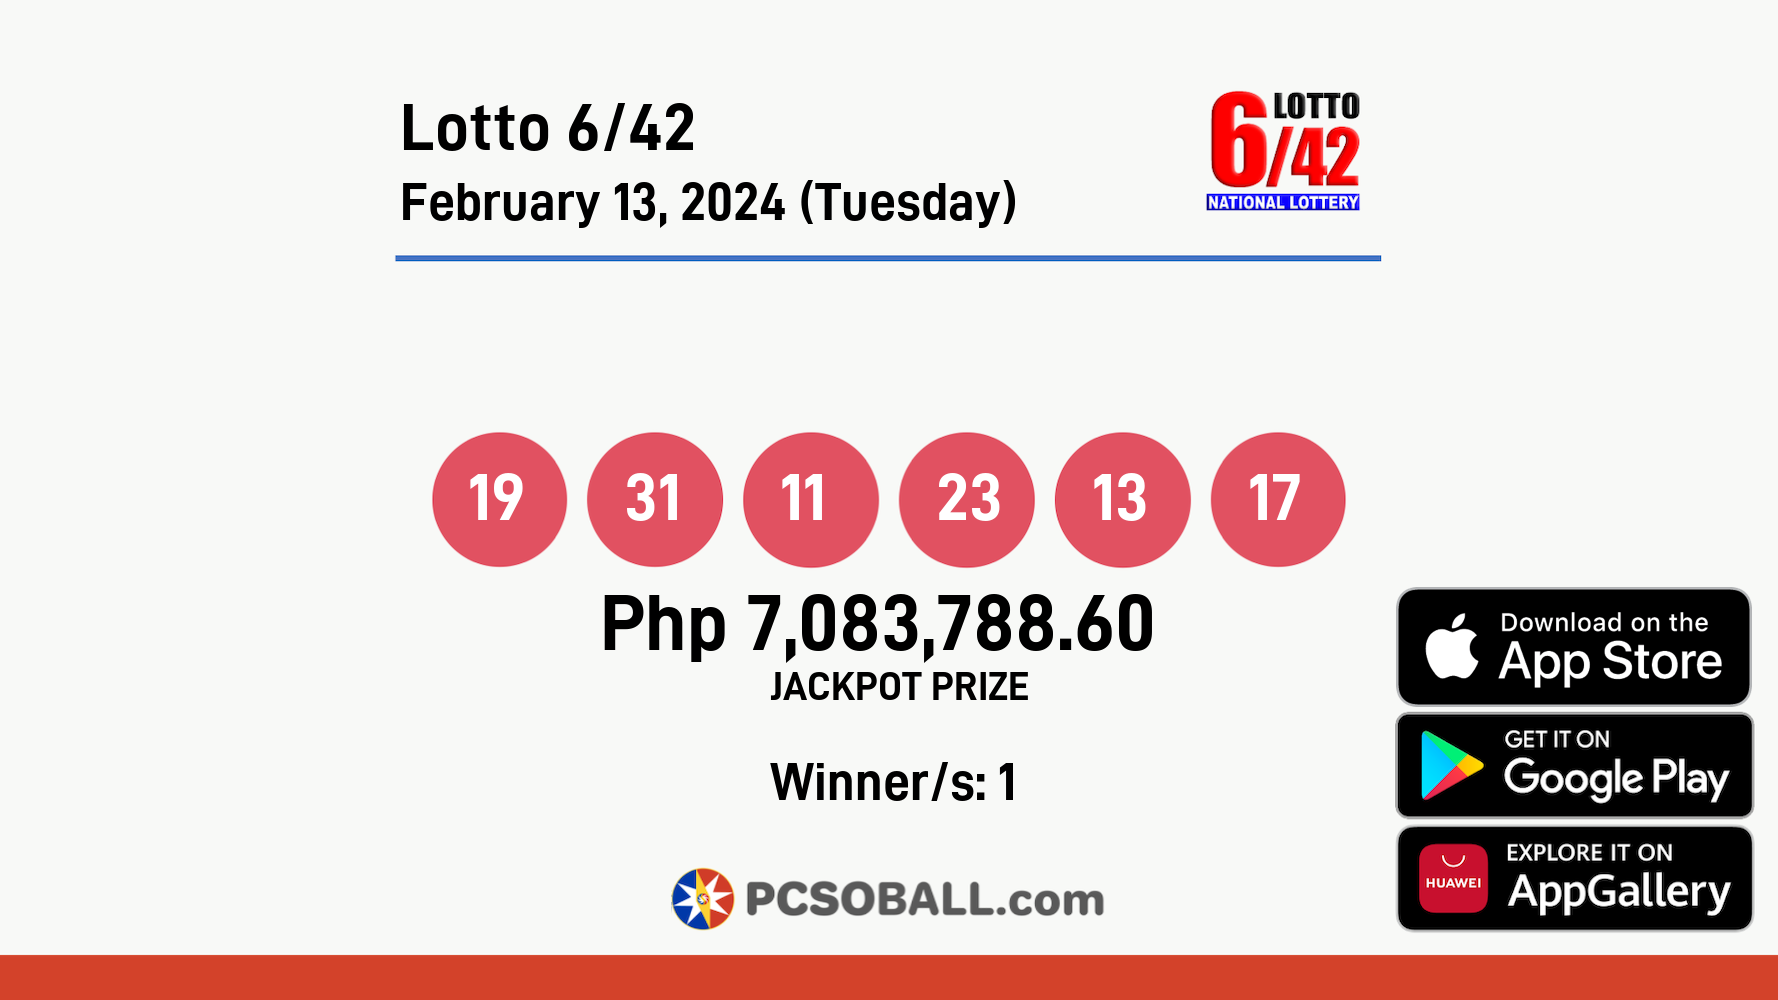 Lotto 6/42 February 13, 2024 (Tuesday) Result